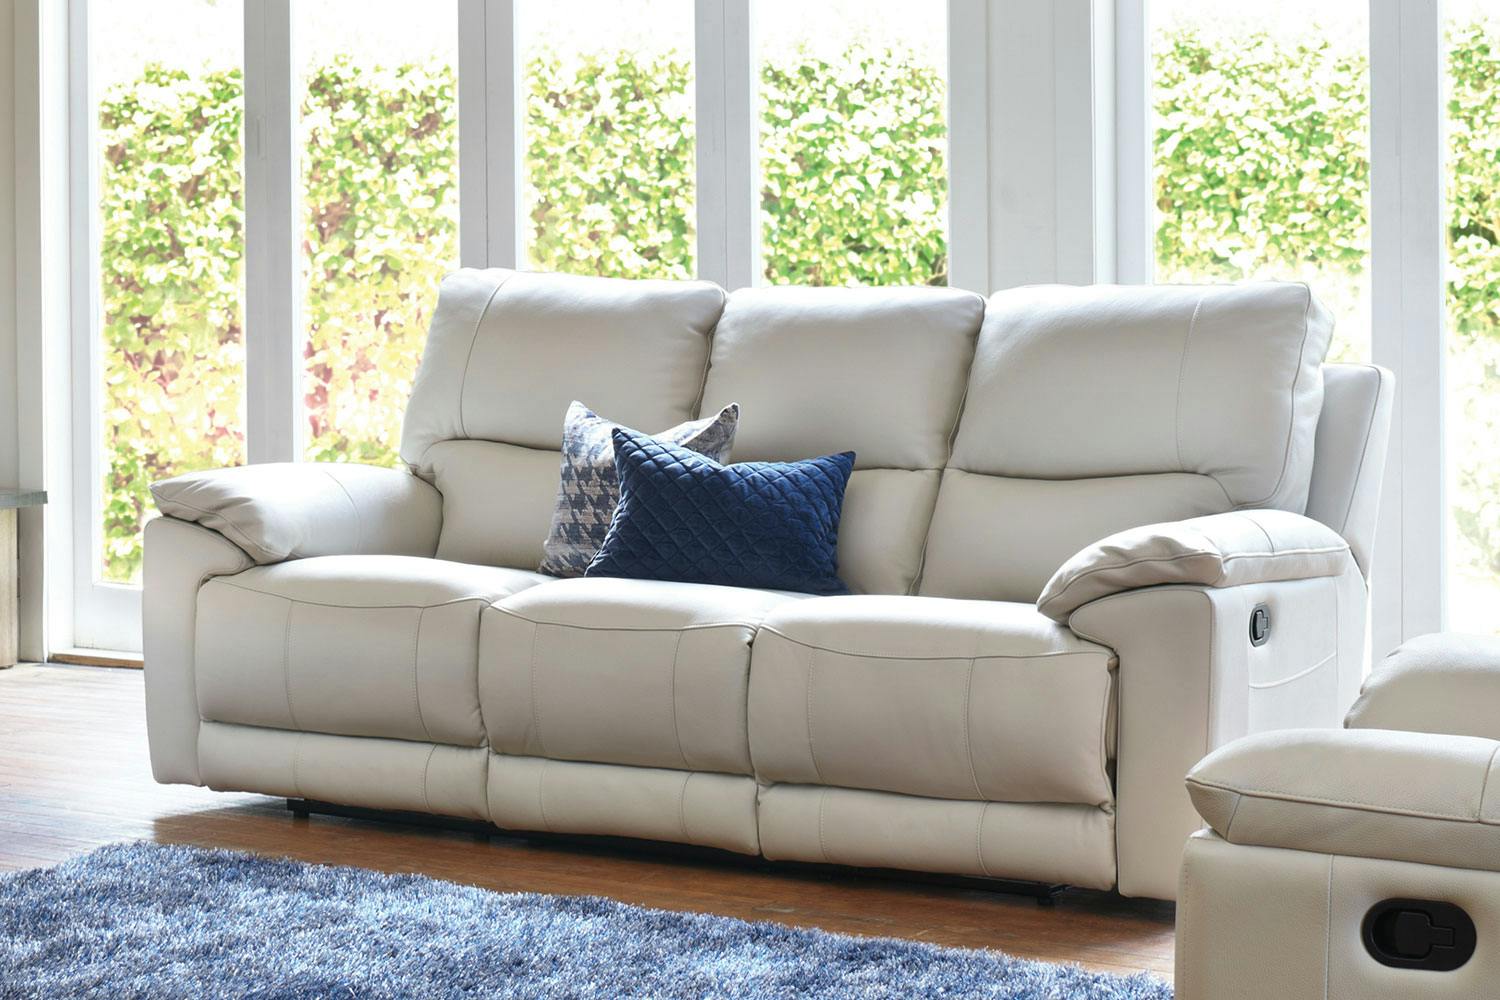 Featherstone 3 Seater Leather Recliner Sofa